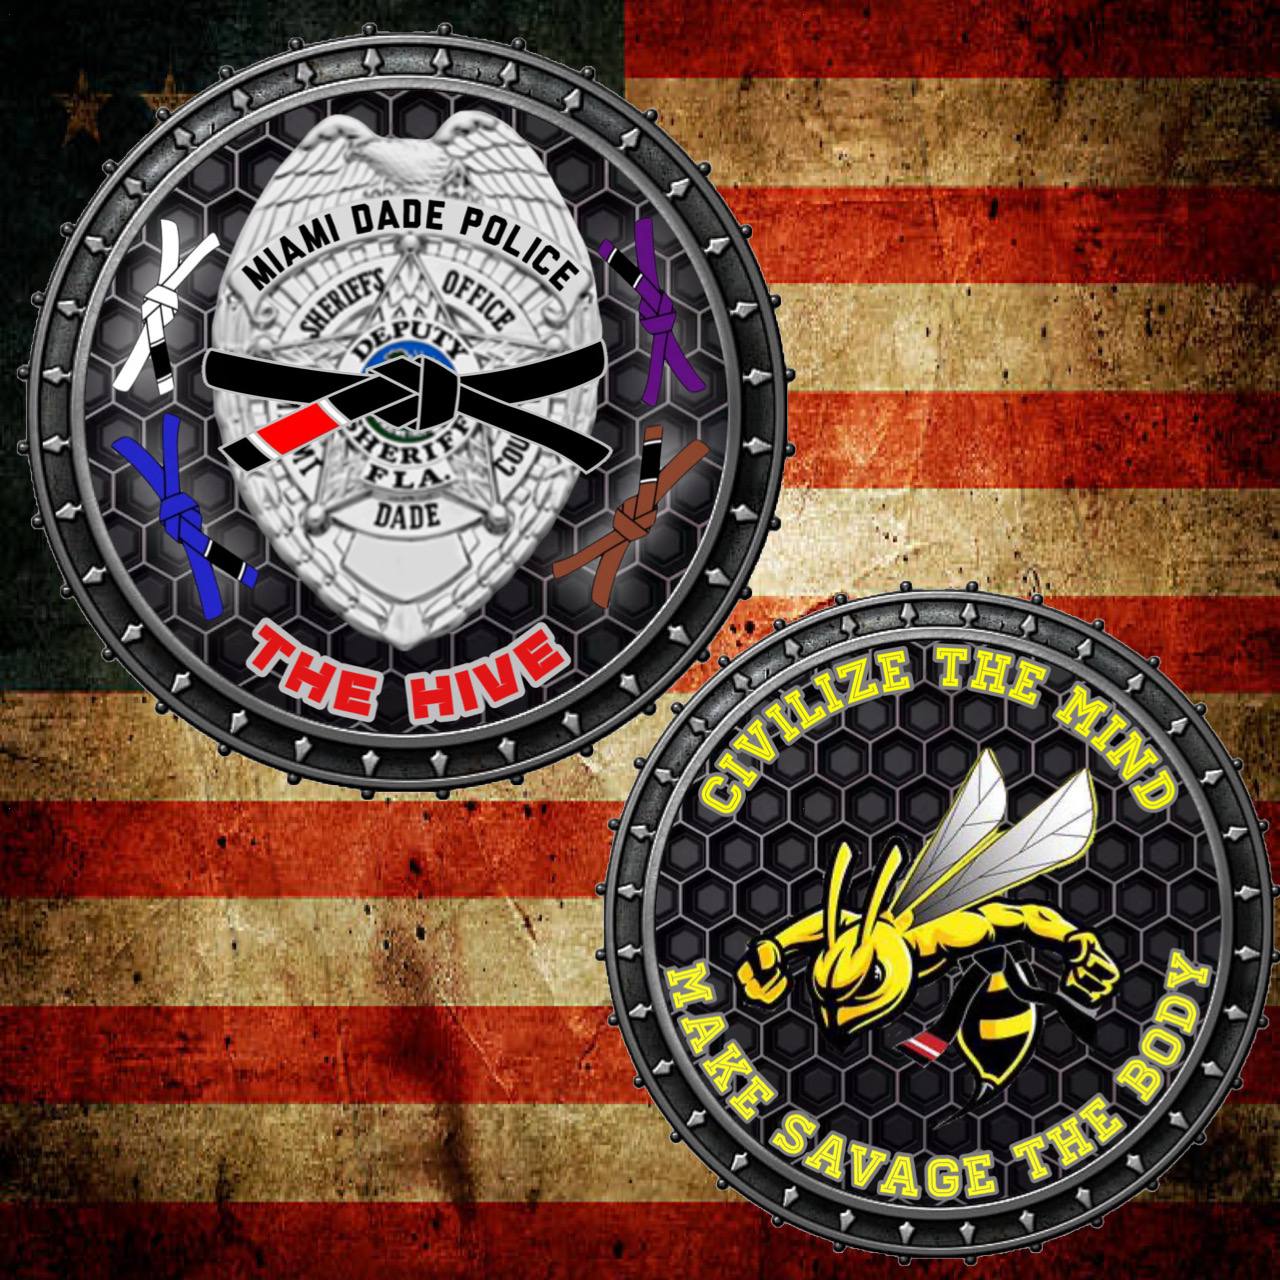 Miami-Dade Police Department “The Hive” challenge coin *PreSale*